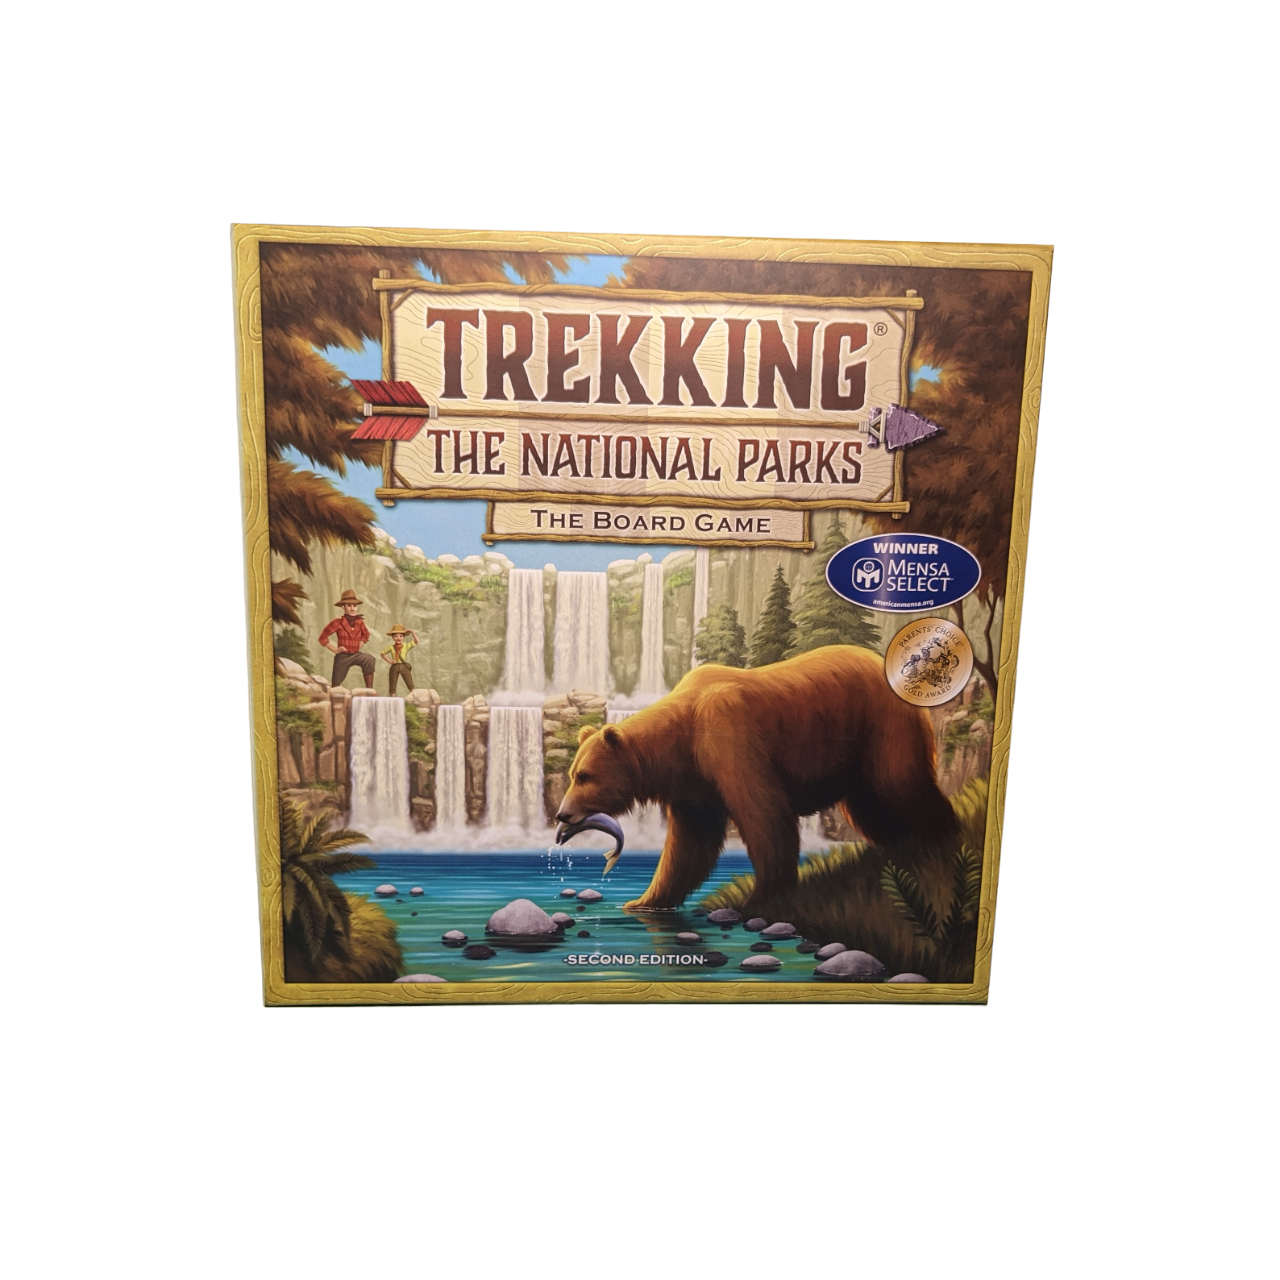 Trekking the National Parks family adventure educational board game box front